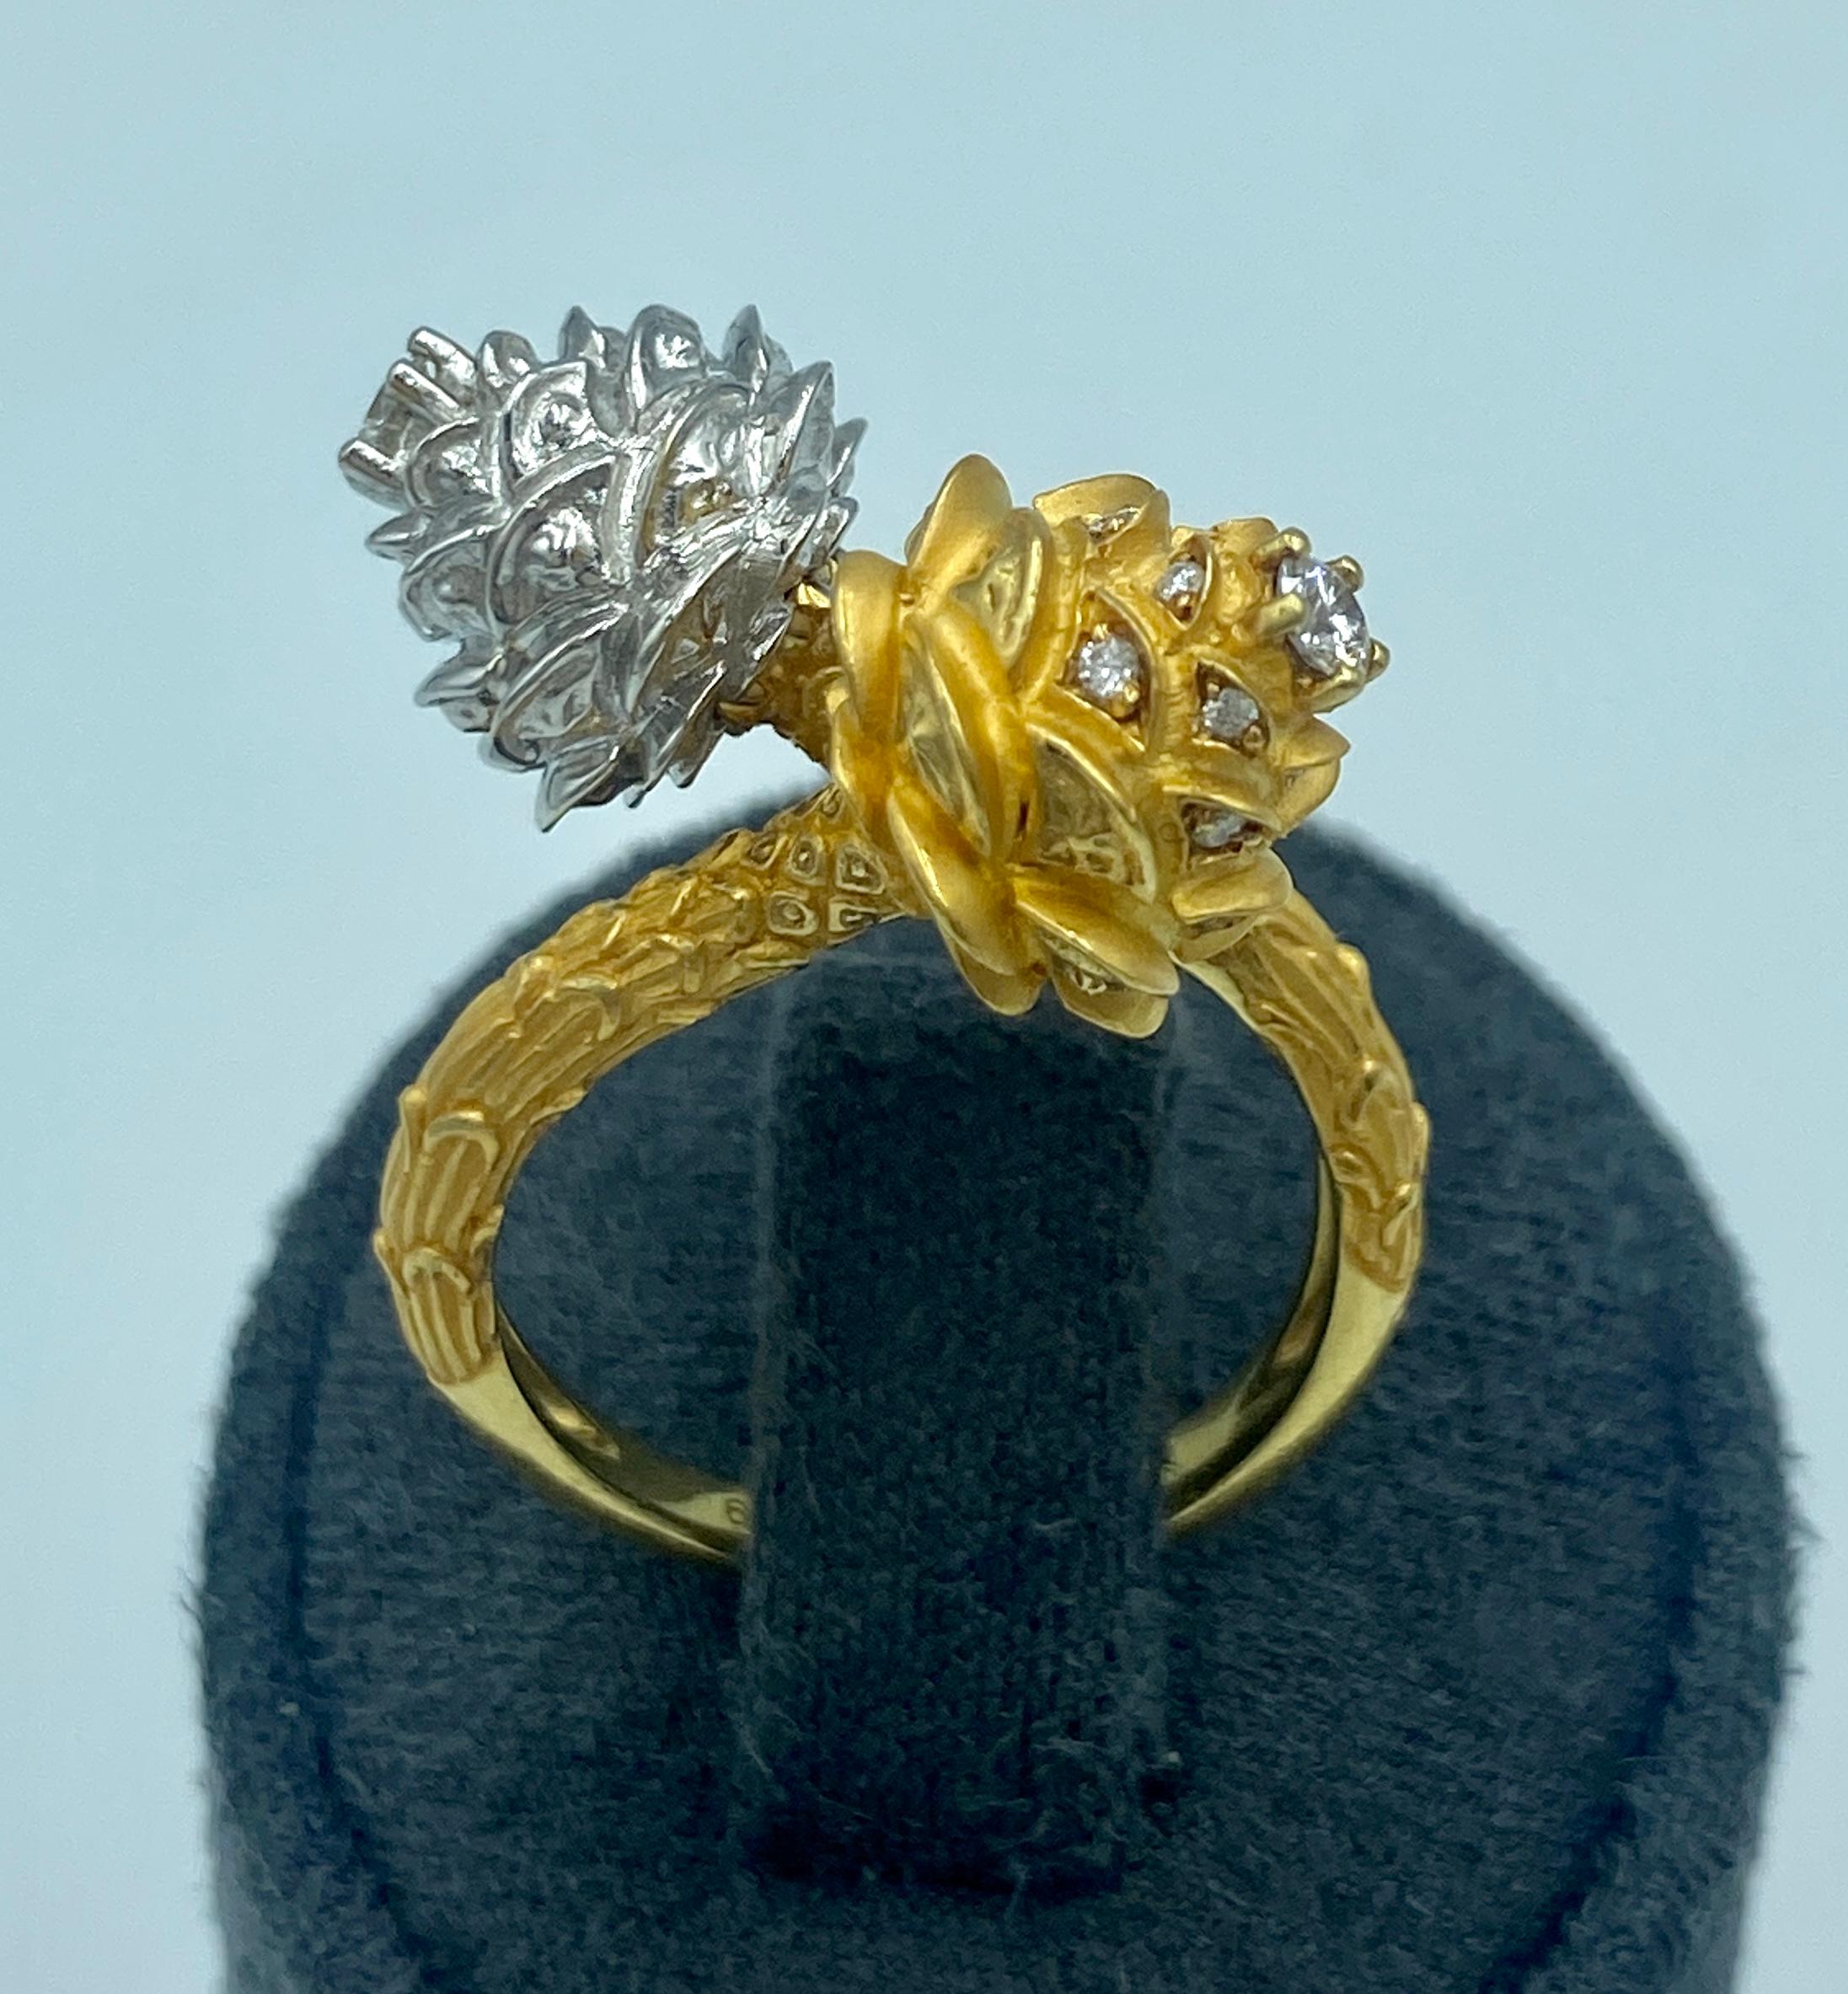 This whimsical double pine cone ring consists of 2 acorns, one made of white gold, the other of yellow gold. Both acorns are adorned with small round cut diamonds.